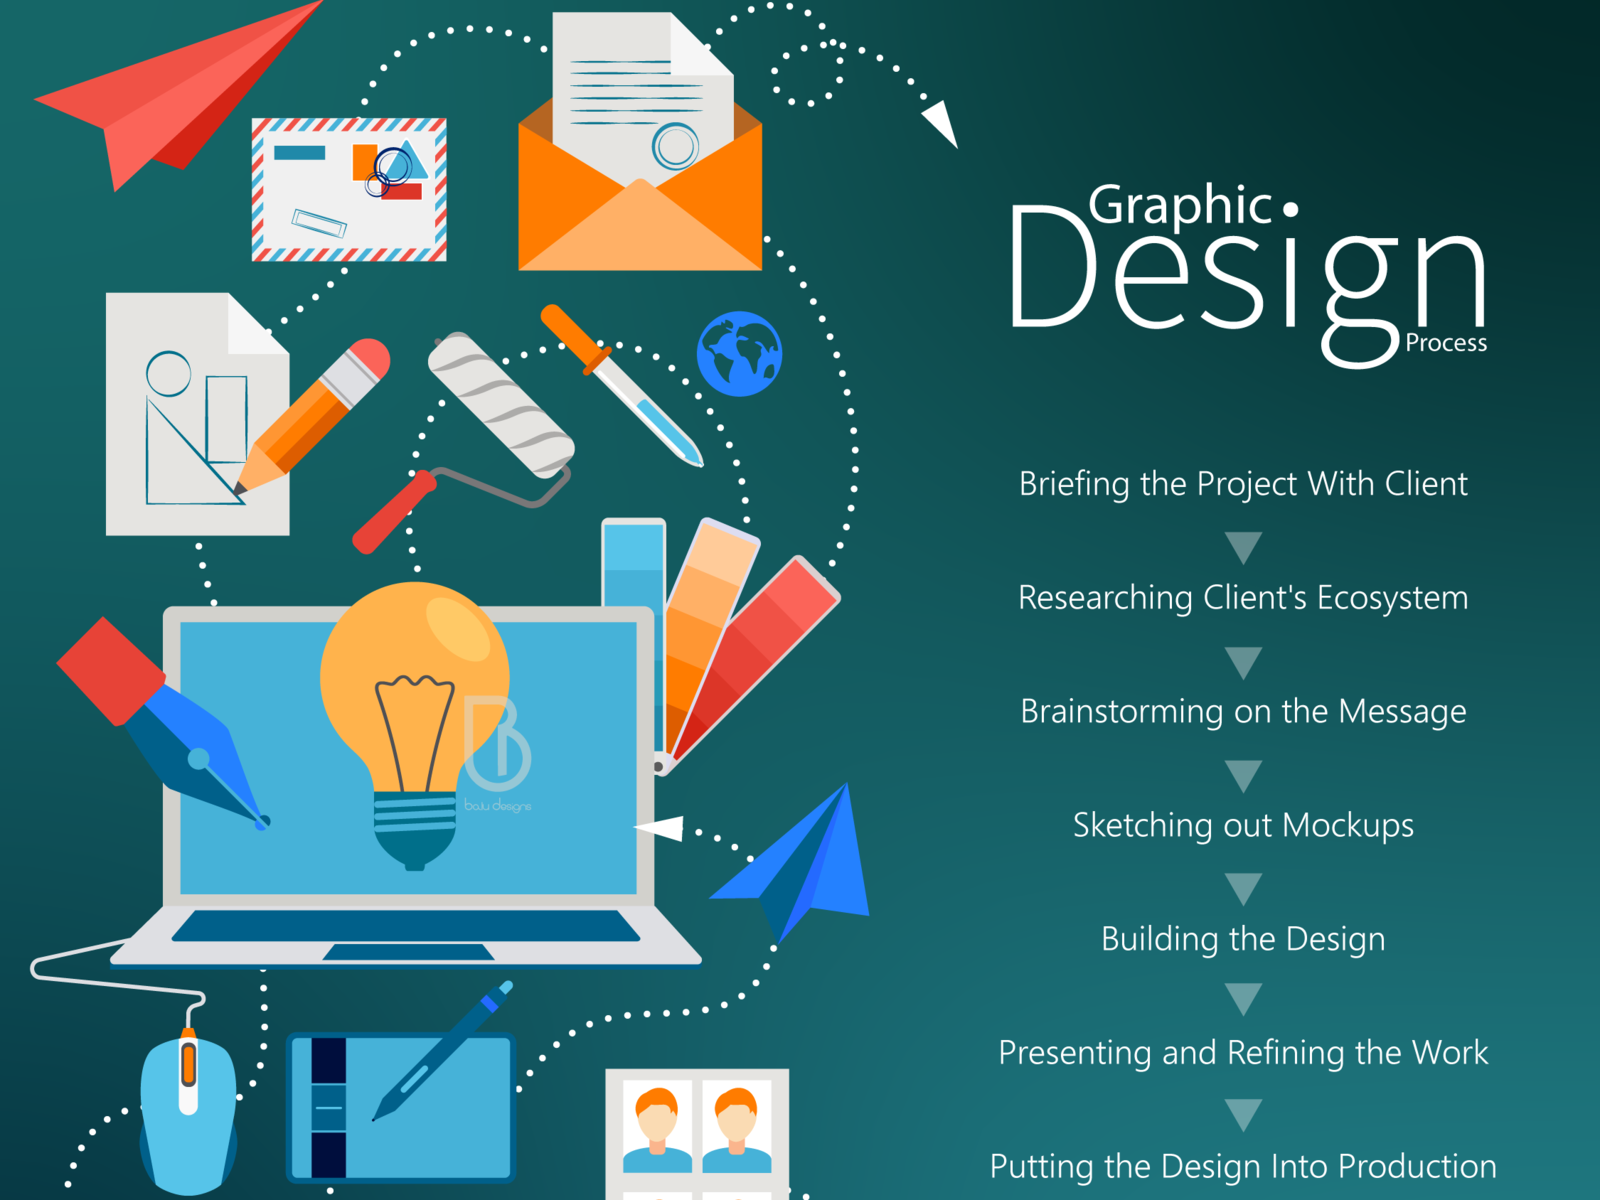 graphic-design-process-by-balu-designs-on-dribbble